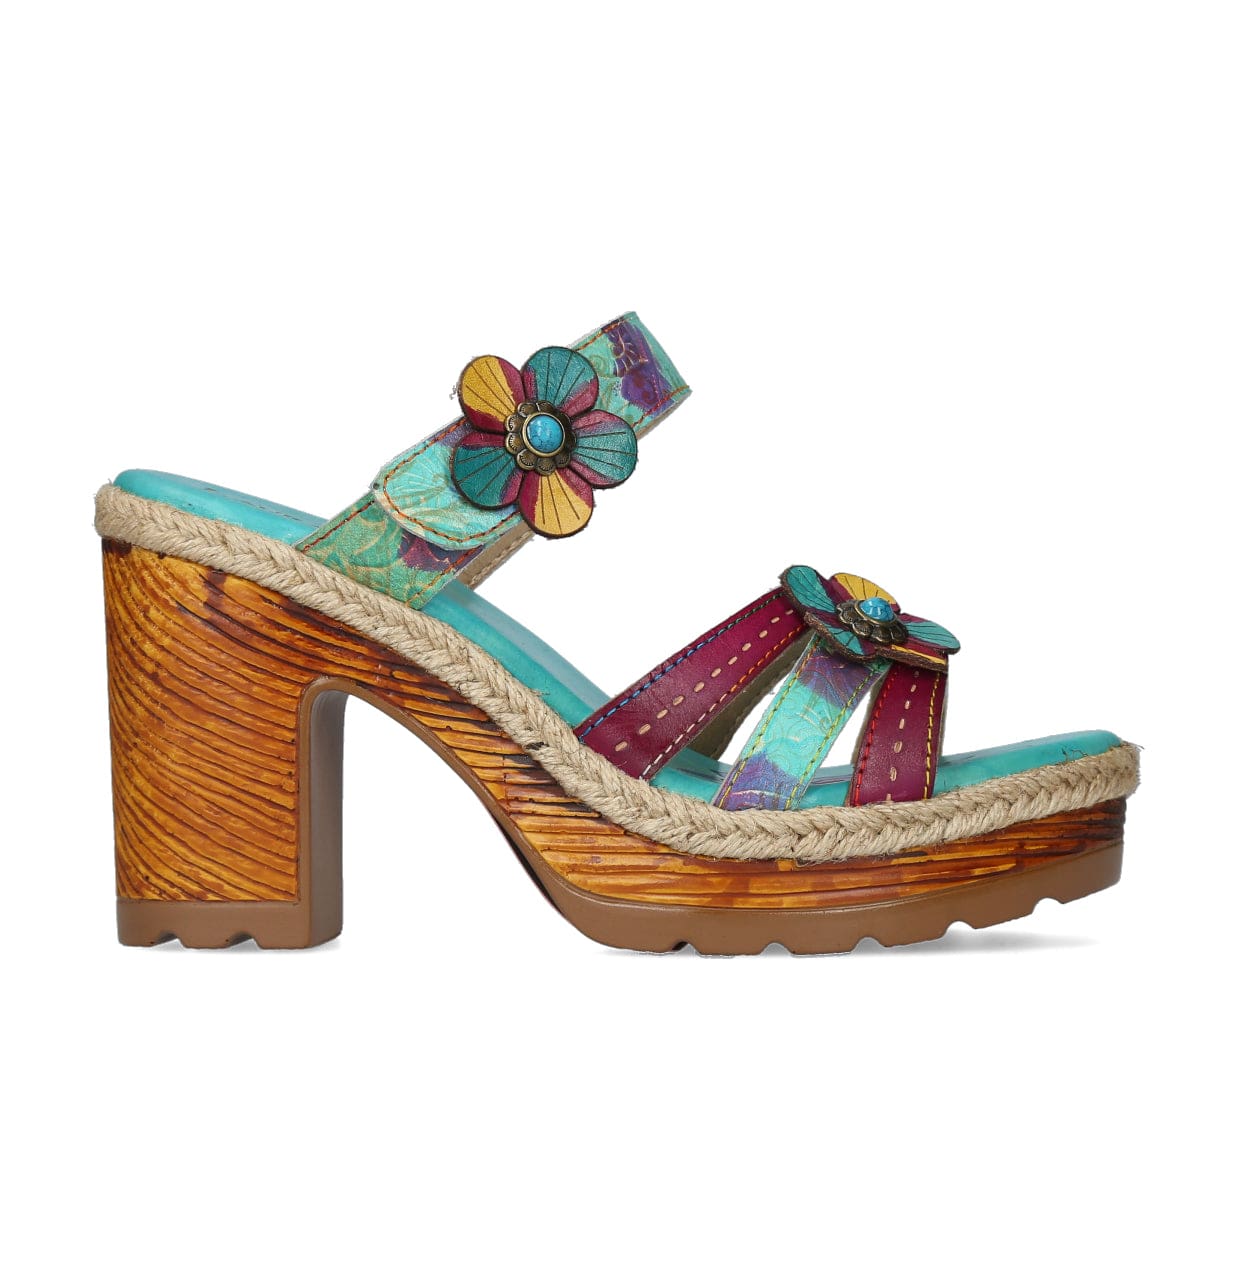 Chaussures JACAO 16 - 35 / Turquoise - Mule